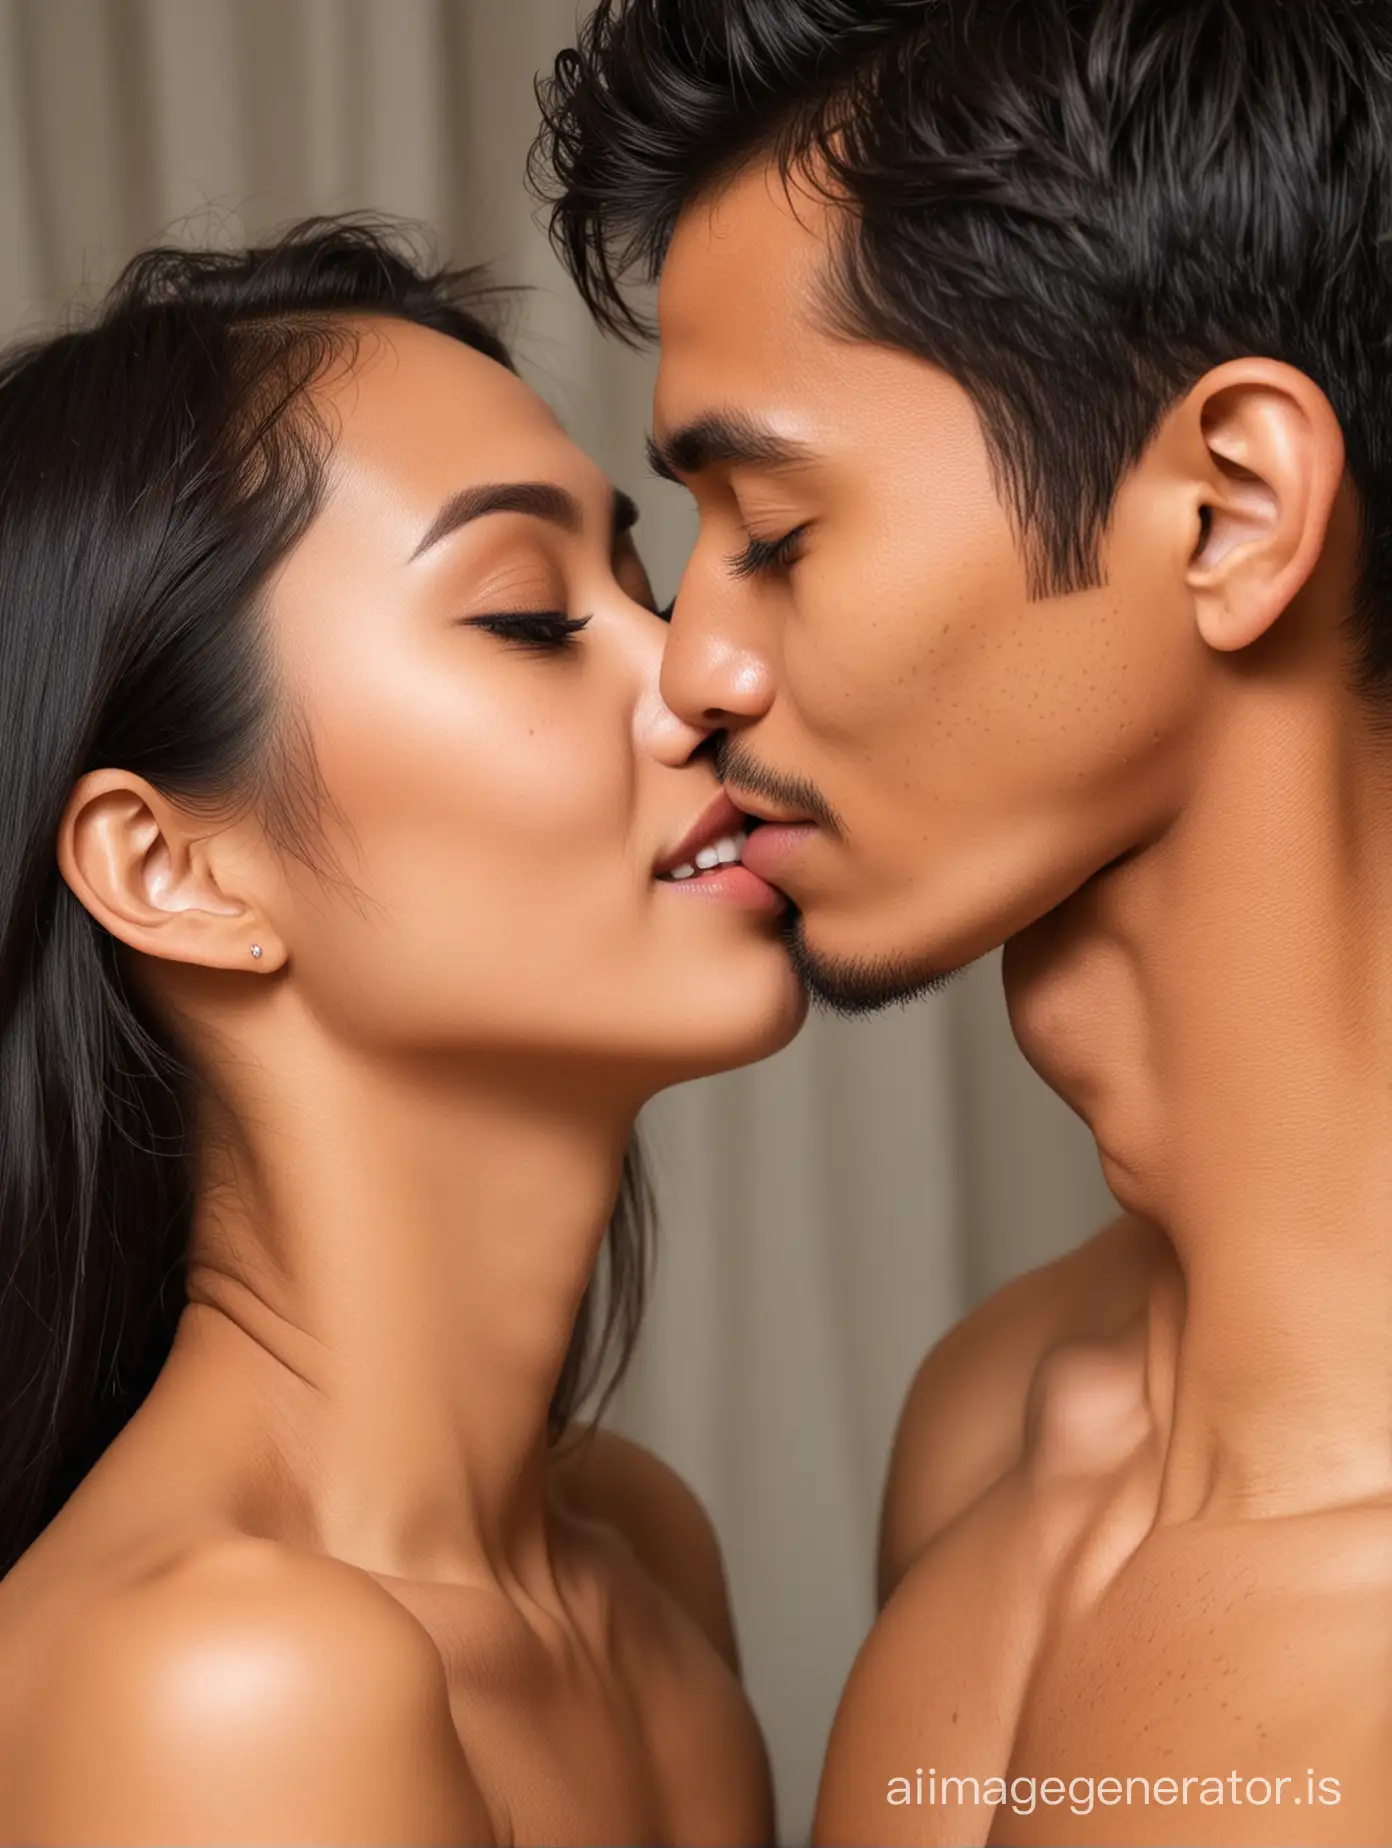 Affectionate-Indonesian-Couple-Shirtless-Boyfriend-Receives-Kiss-from-Young-Woman